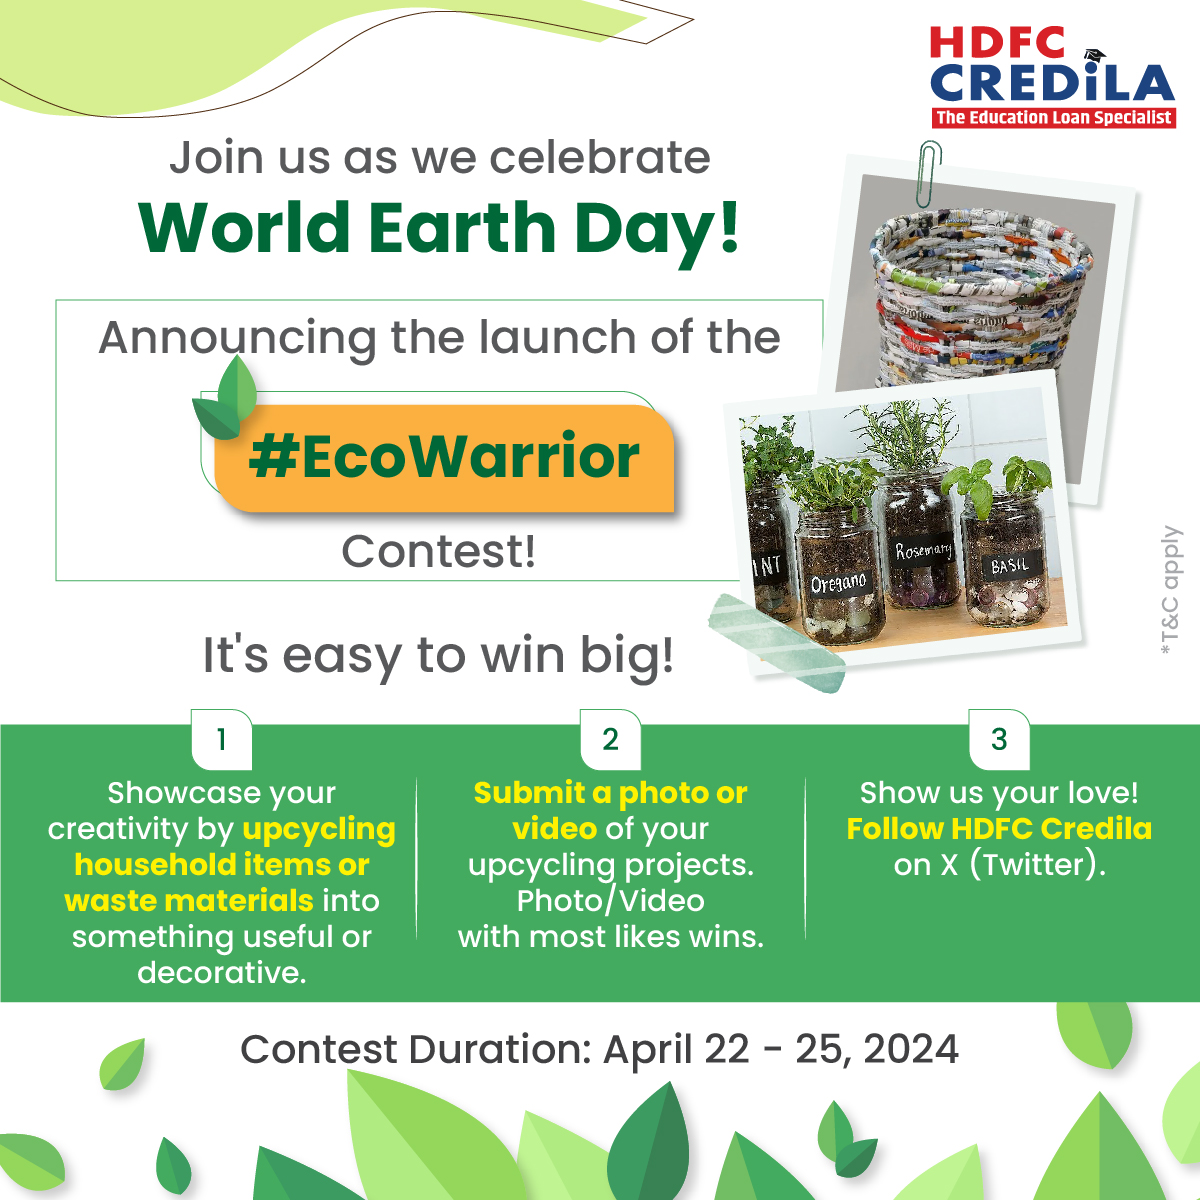 Win an Amazon e-voucher of ₹1,000! Participate now! 

*T&C apply bit.ly/3UtjhLJ

#HDFCCredila #HDFCCredilaContest #EcoWarrior #WorldEarthDay #WorldEarthDay2024 #EarthDay #Earthday2024 #Contest #PhotoContest #VideoContest #ContestAlert #ContestTime #GiveAway…